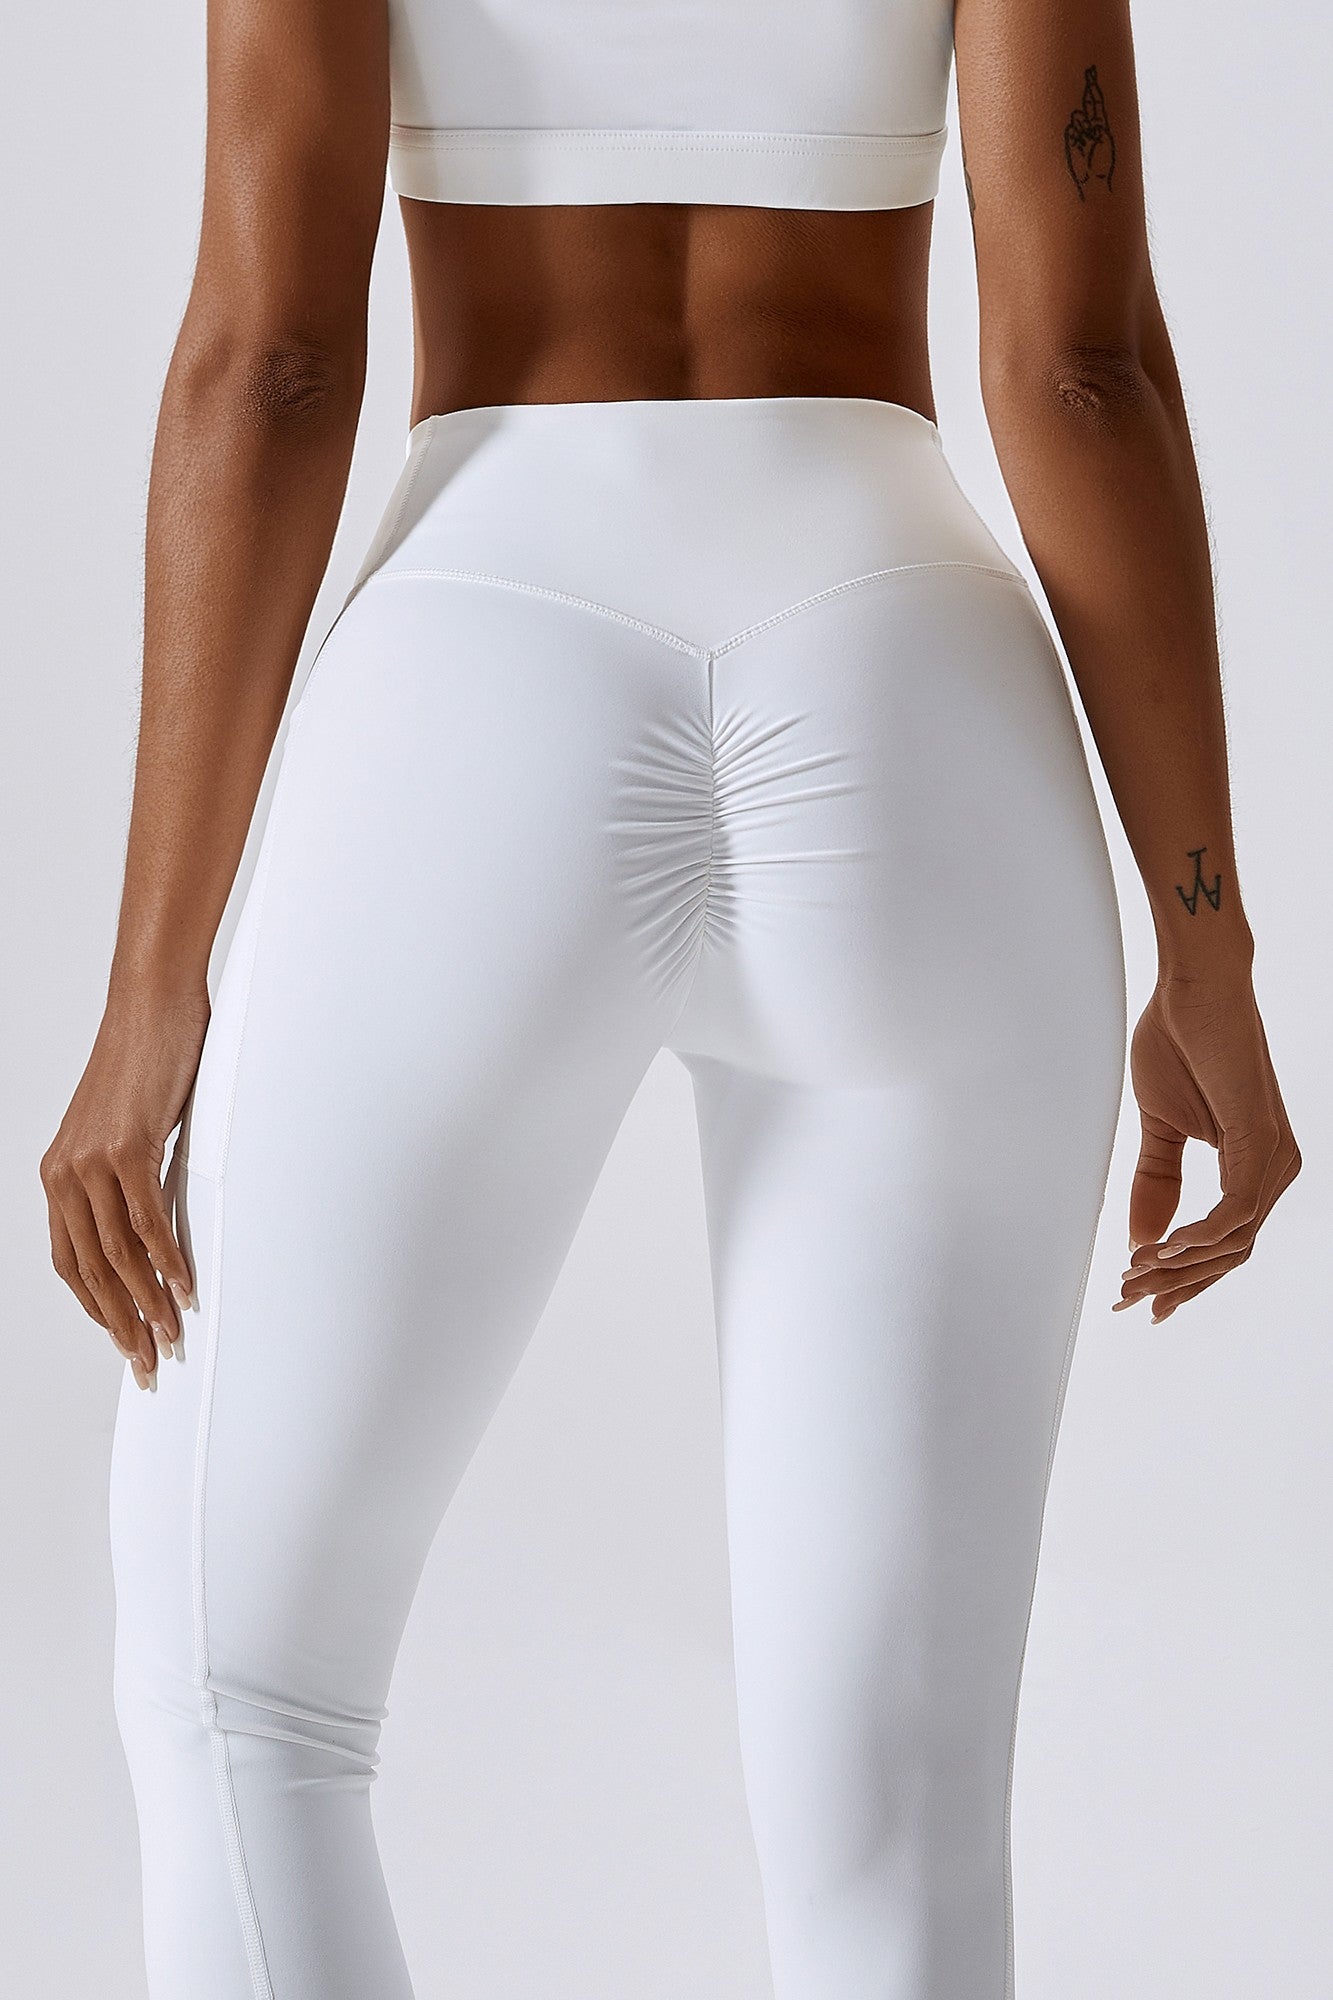 V Crossover Leggings for Women Solid Butt Lifting High Waist Seamless  Workout Yoga Pants Buttery Soft Athletic Pants(L，White）